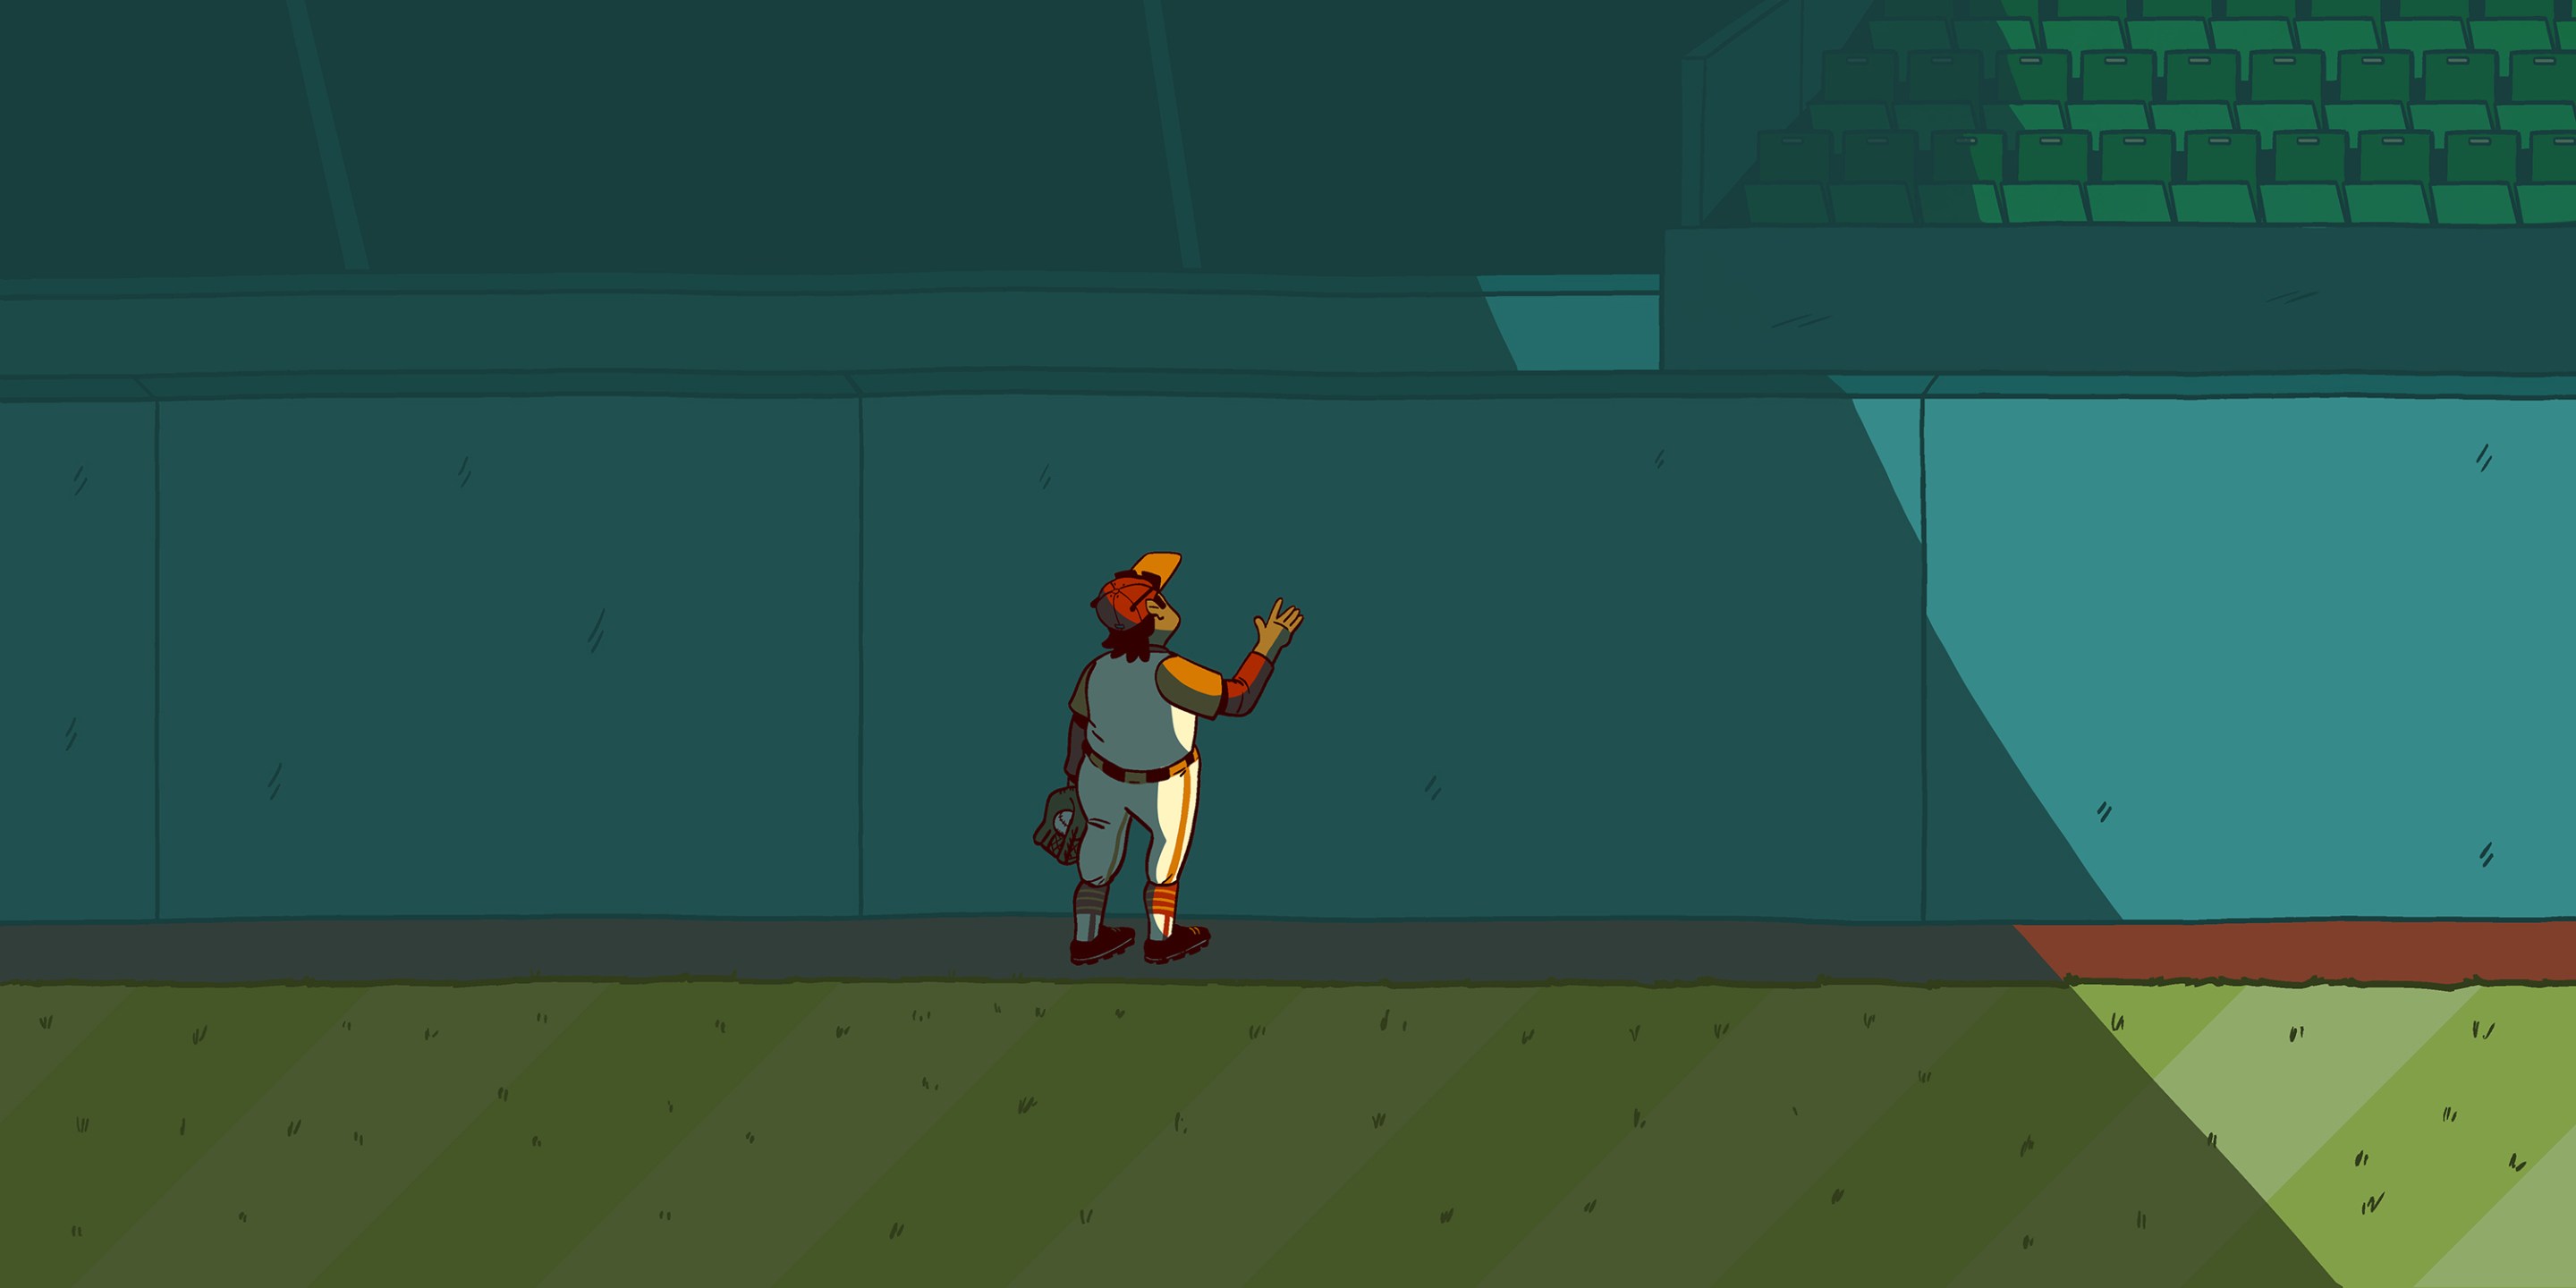 A cartoon of an outfield wall with an encroaching shadow over the player standing looking at it. It feels dark and desolate. The baseball stadium is empty.